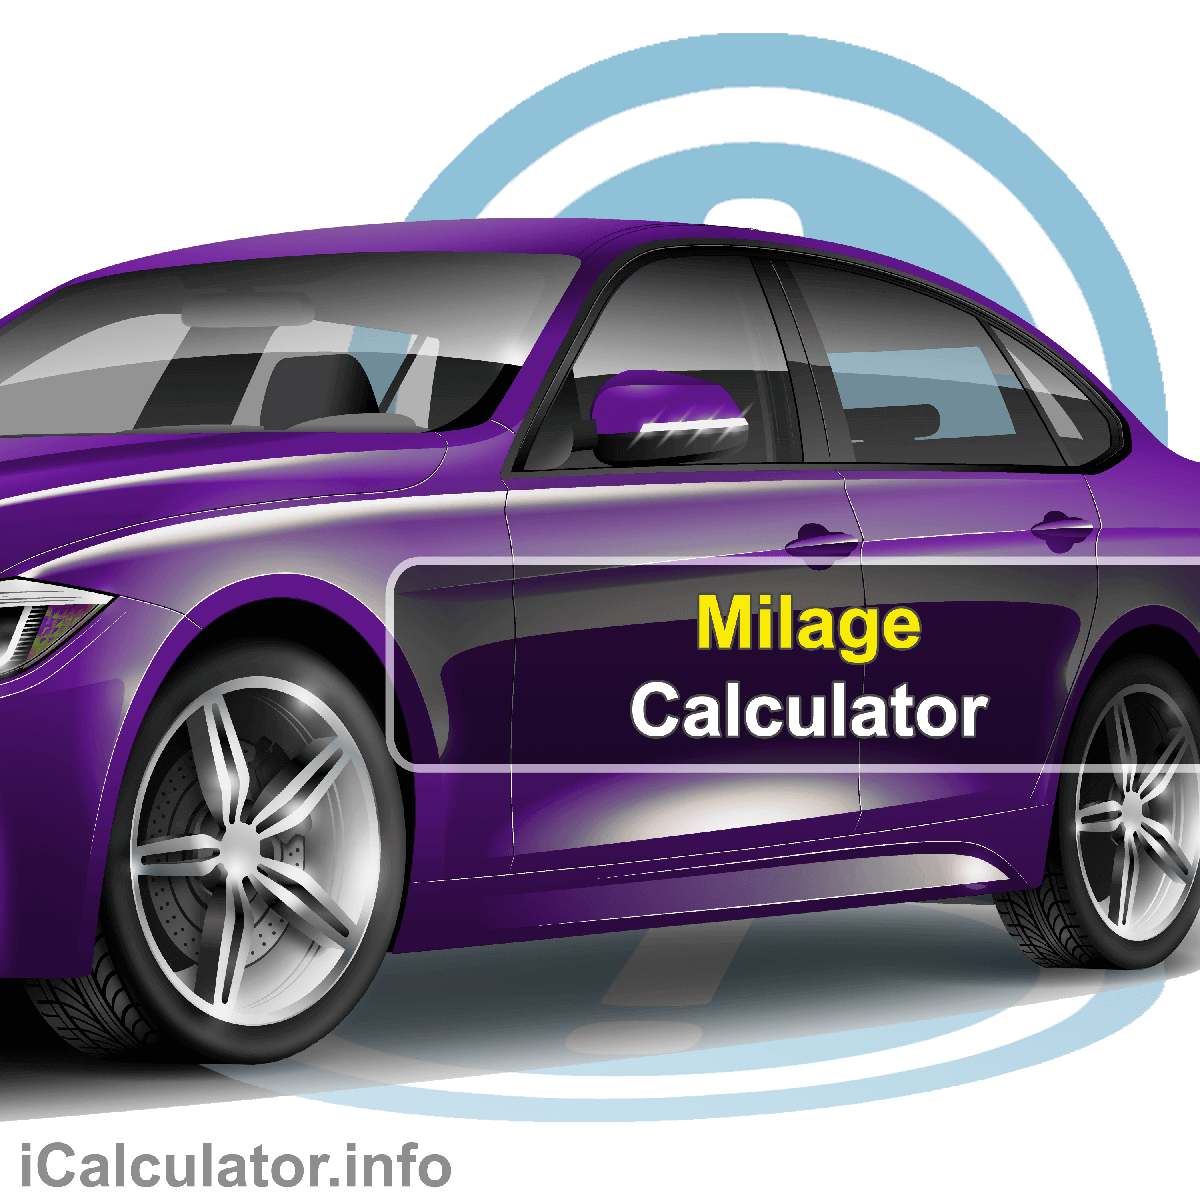 Gas Mileage Comparison Calculator. This image provides details of how to calculate gas mileage and fuel consumption using a calculator and notepad. By using the gas milage and fuel consumption formulas, the Gas Mileage Comparison Calculator provides a true calculation of the cost savings on fuel and make you more aware about your regular fuel consumption